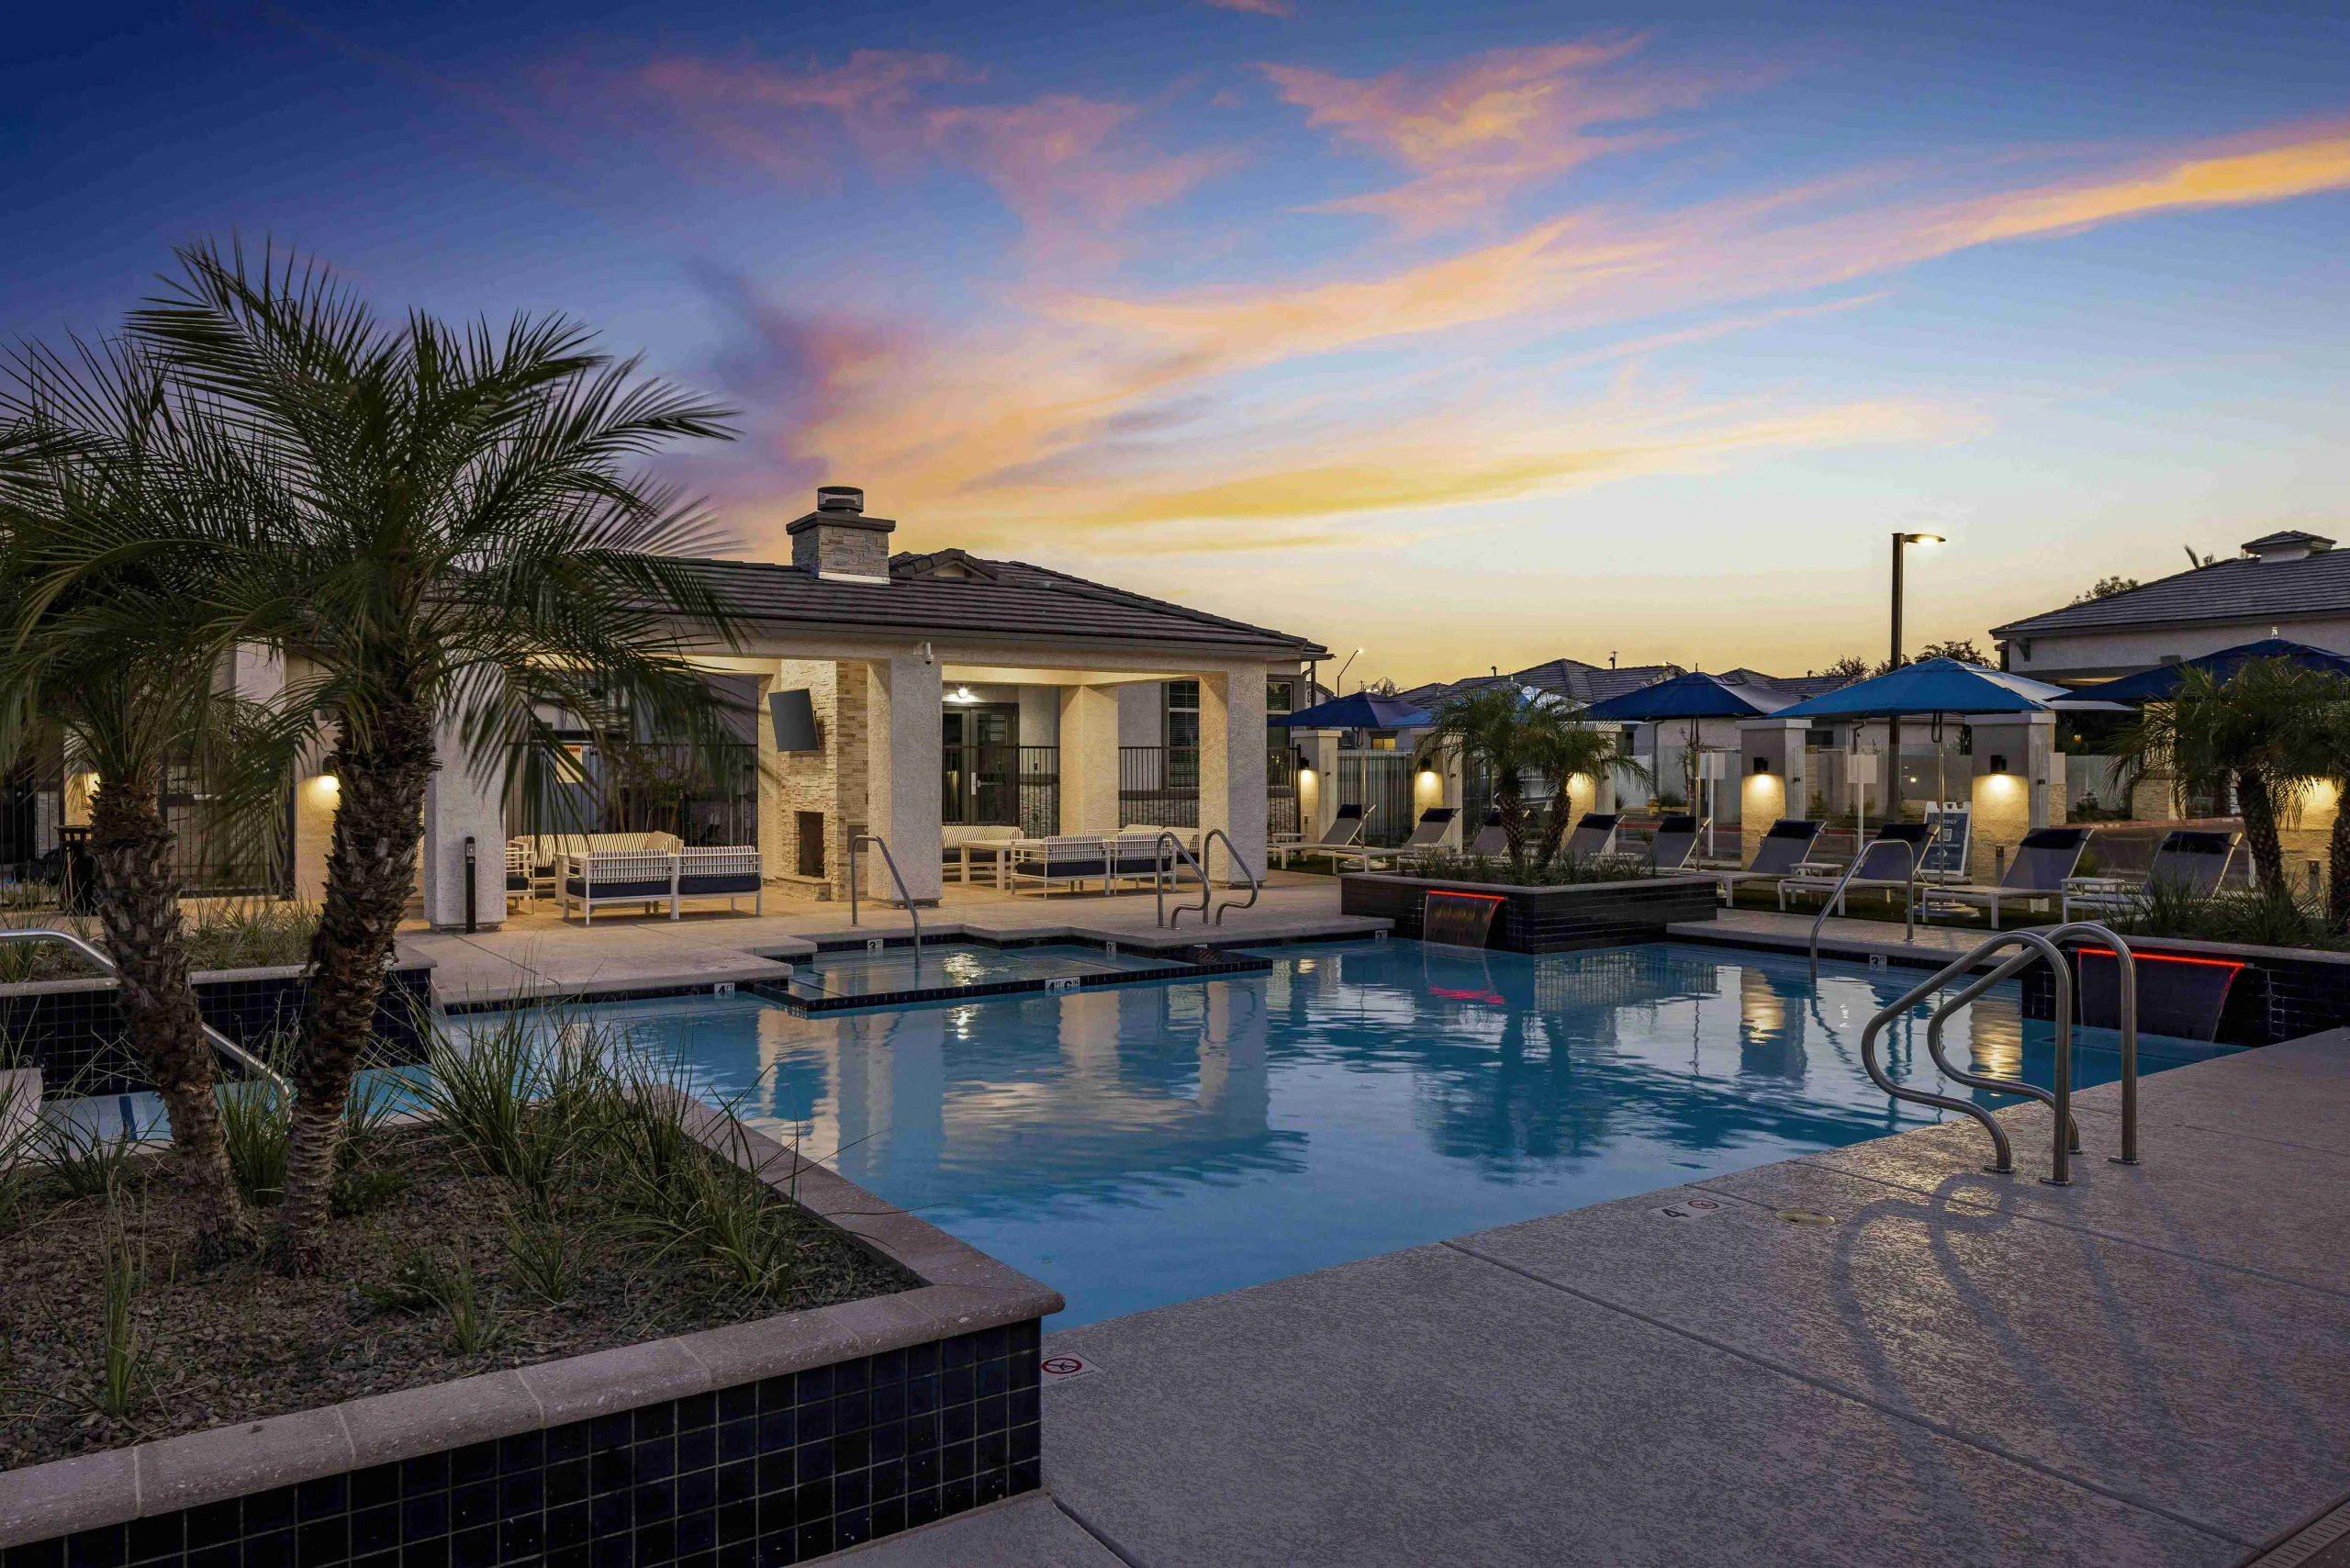 Pool and spa deck during sunset with water features, outdoor covered pergola, and lawn chairs on grass.